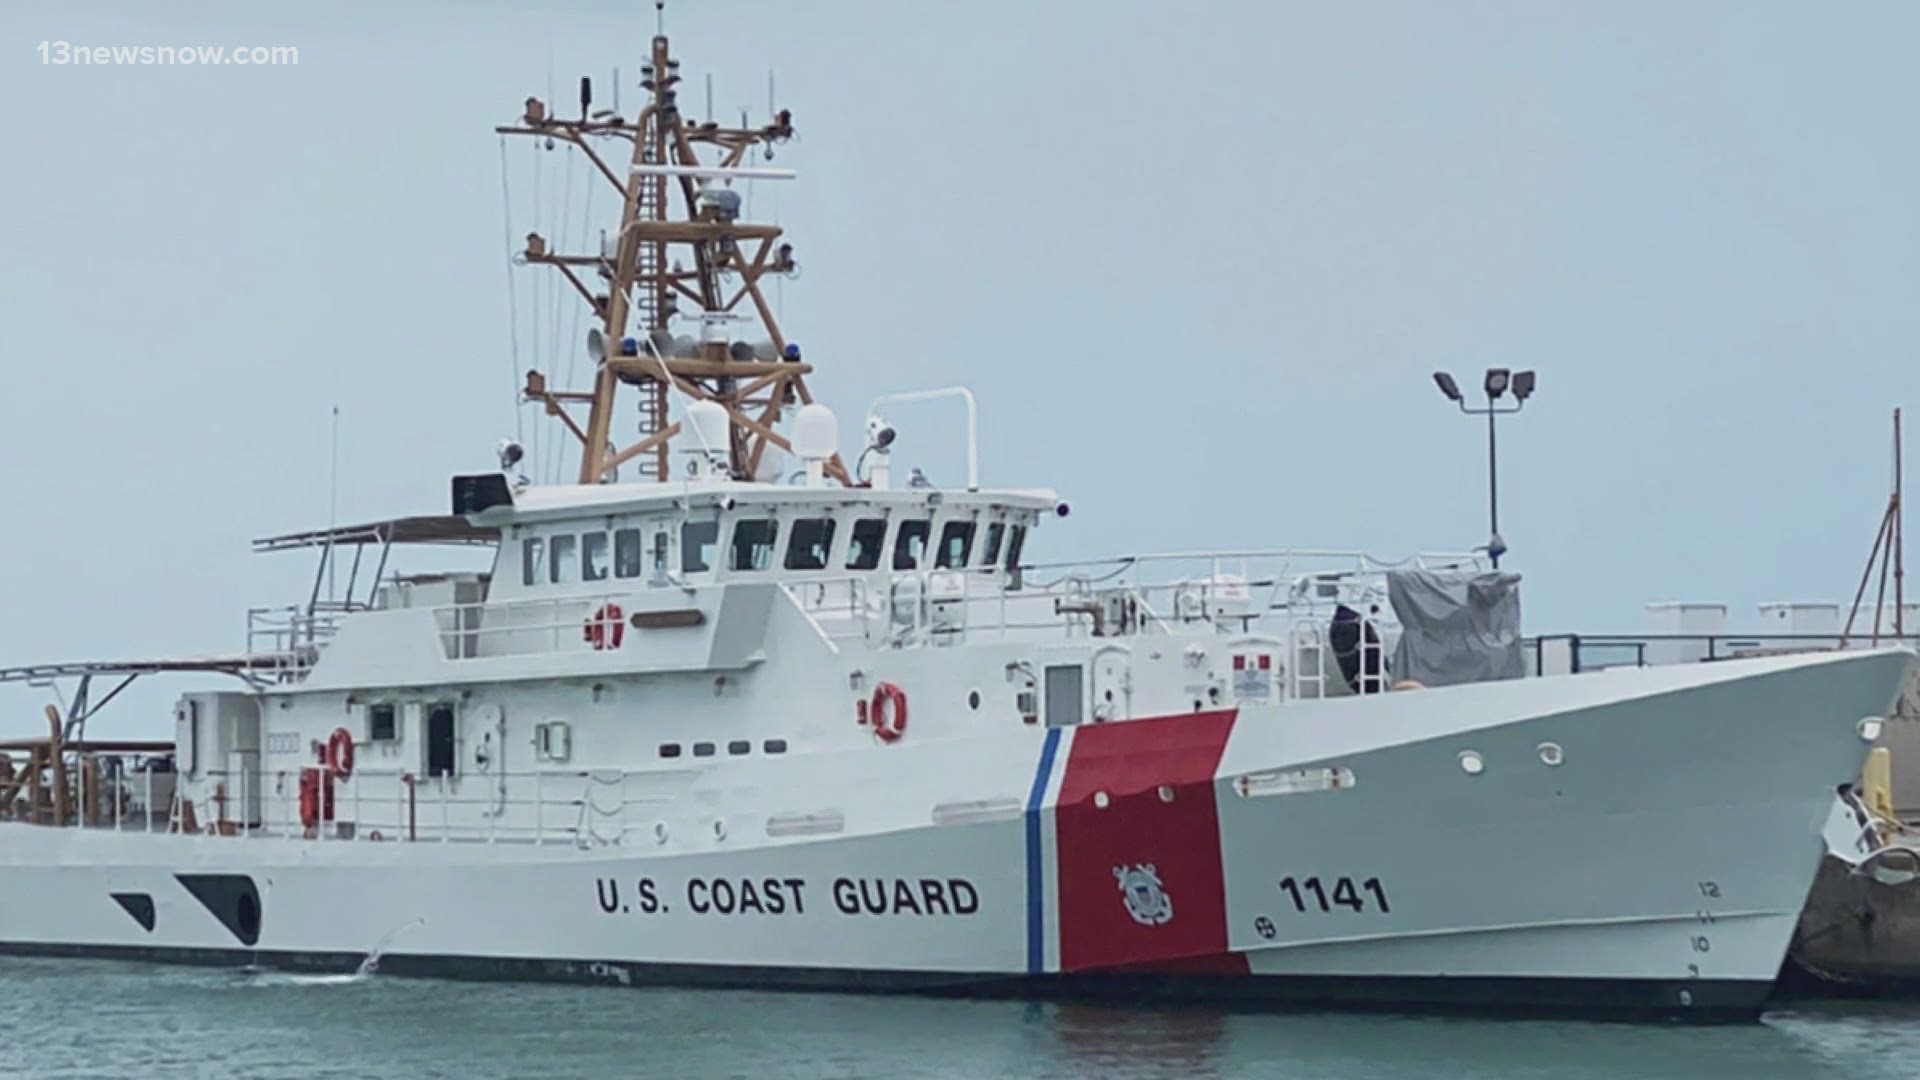 The ship is the Coast Guard's 41st Sentinel-class cutter and is the first of six FRCs planned for service in Manama, Bahrain.